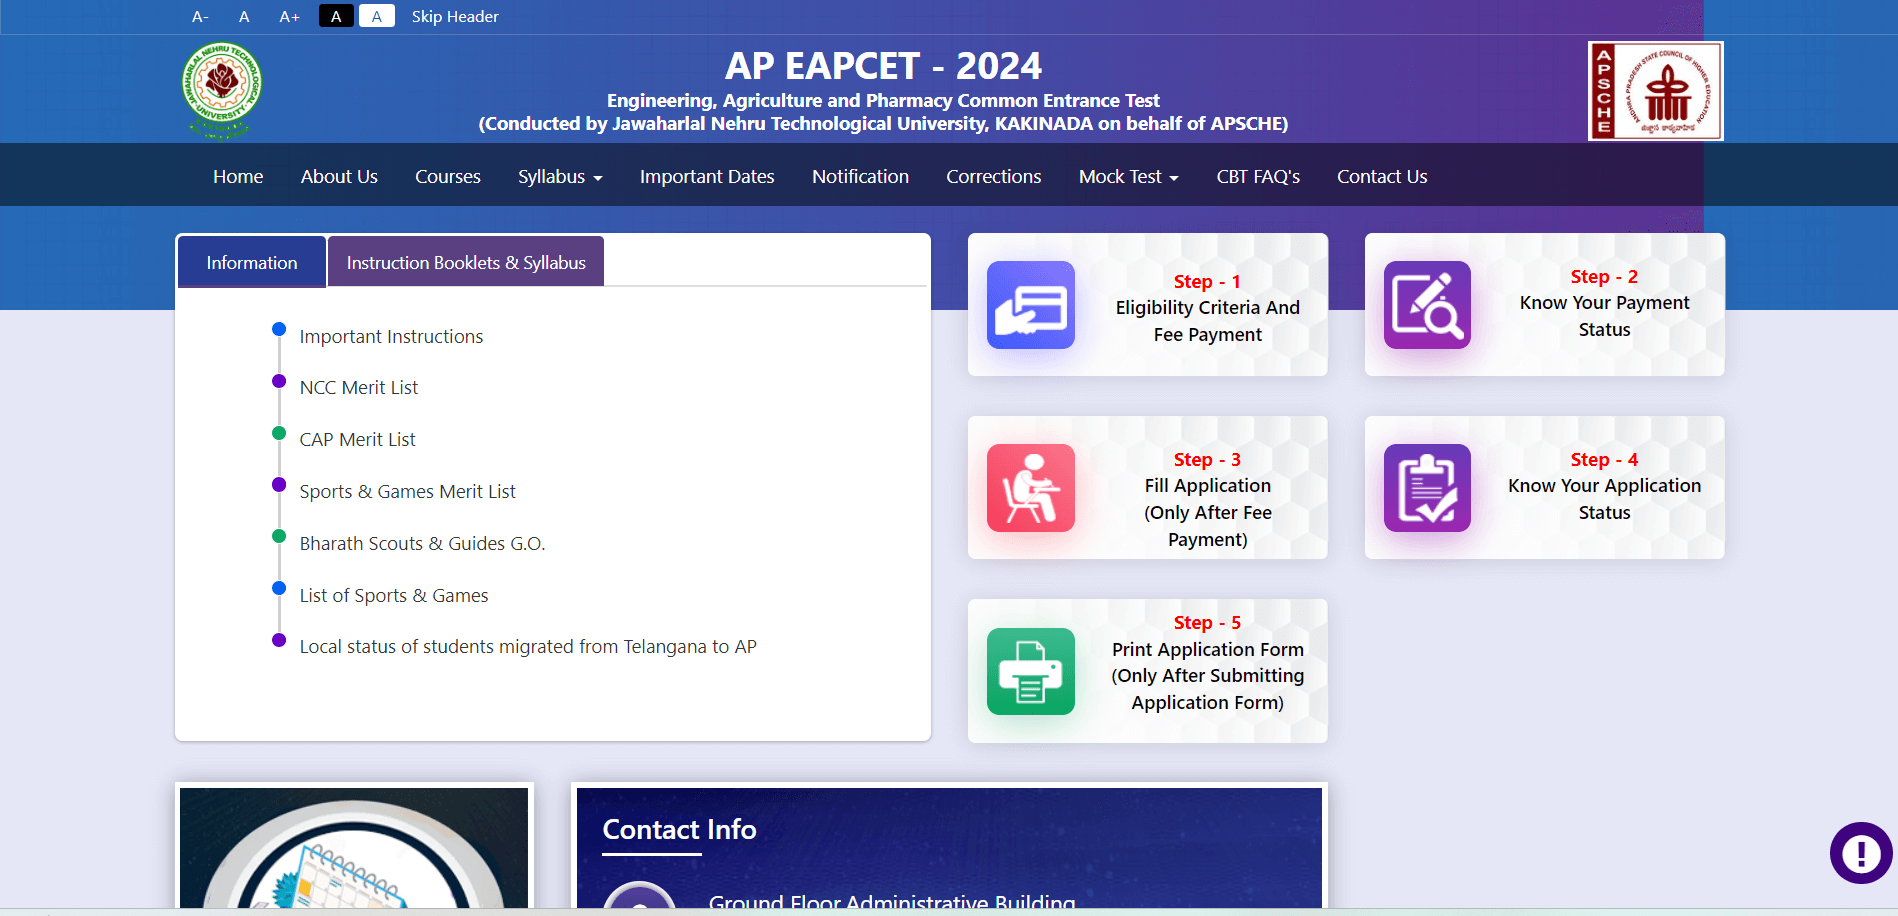 AP EAPCET Main Page 2024